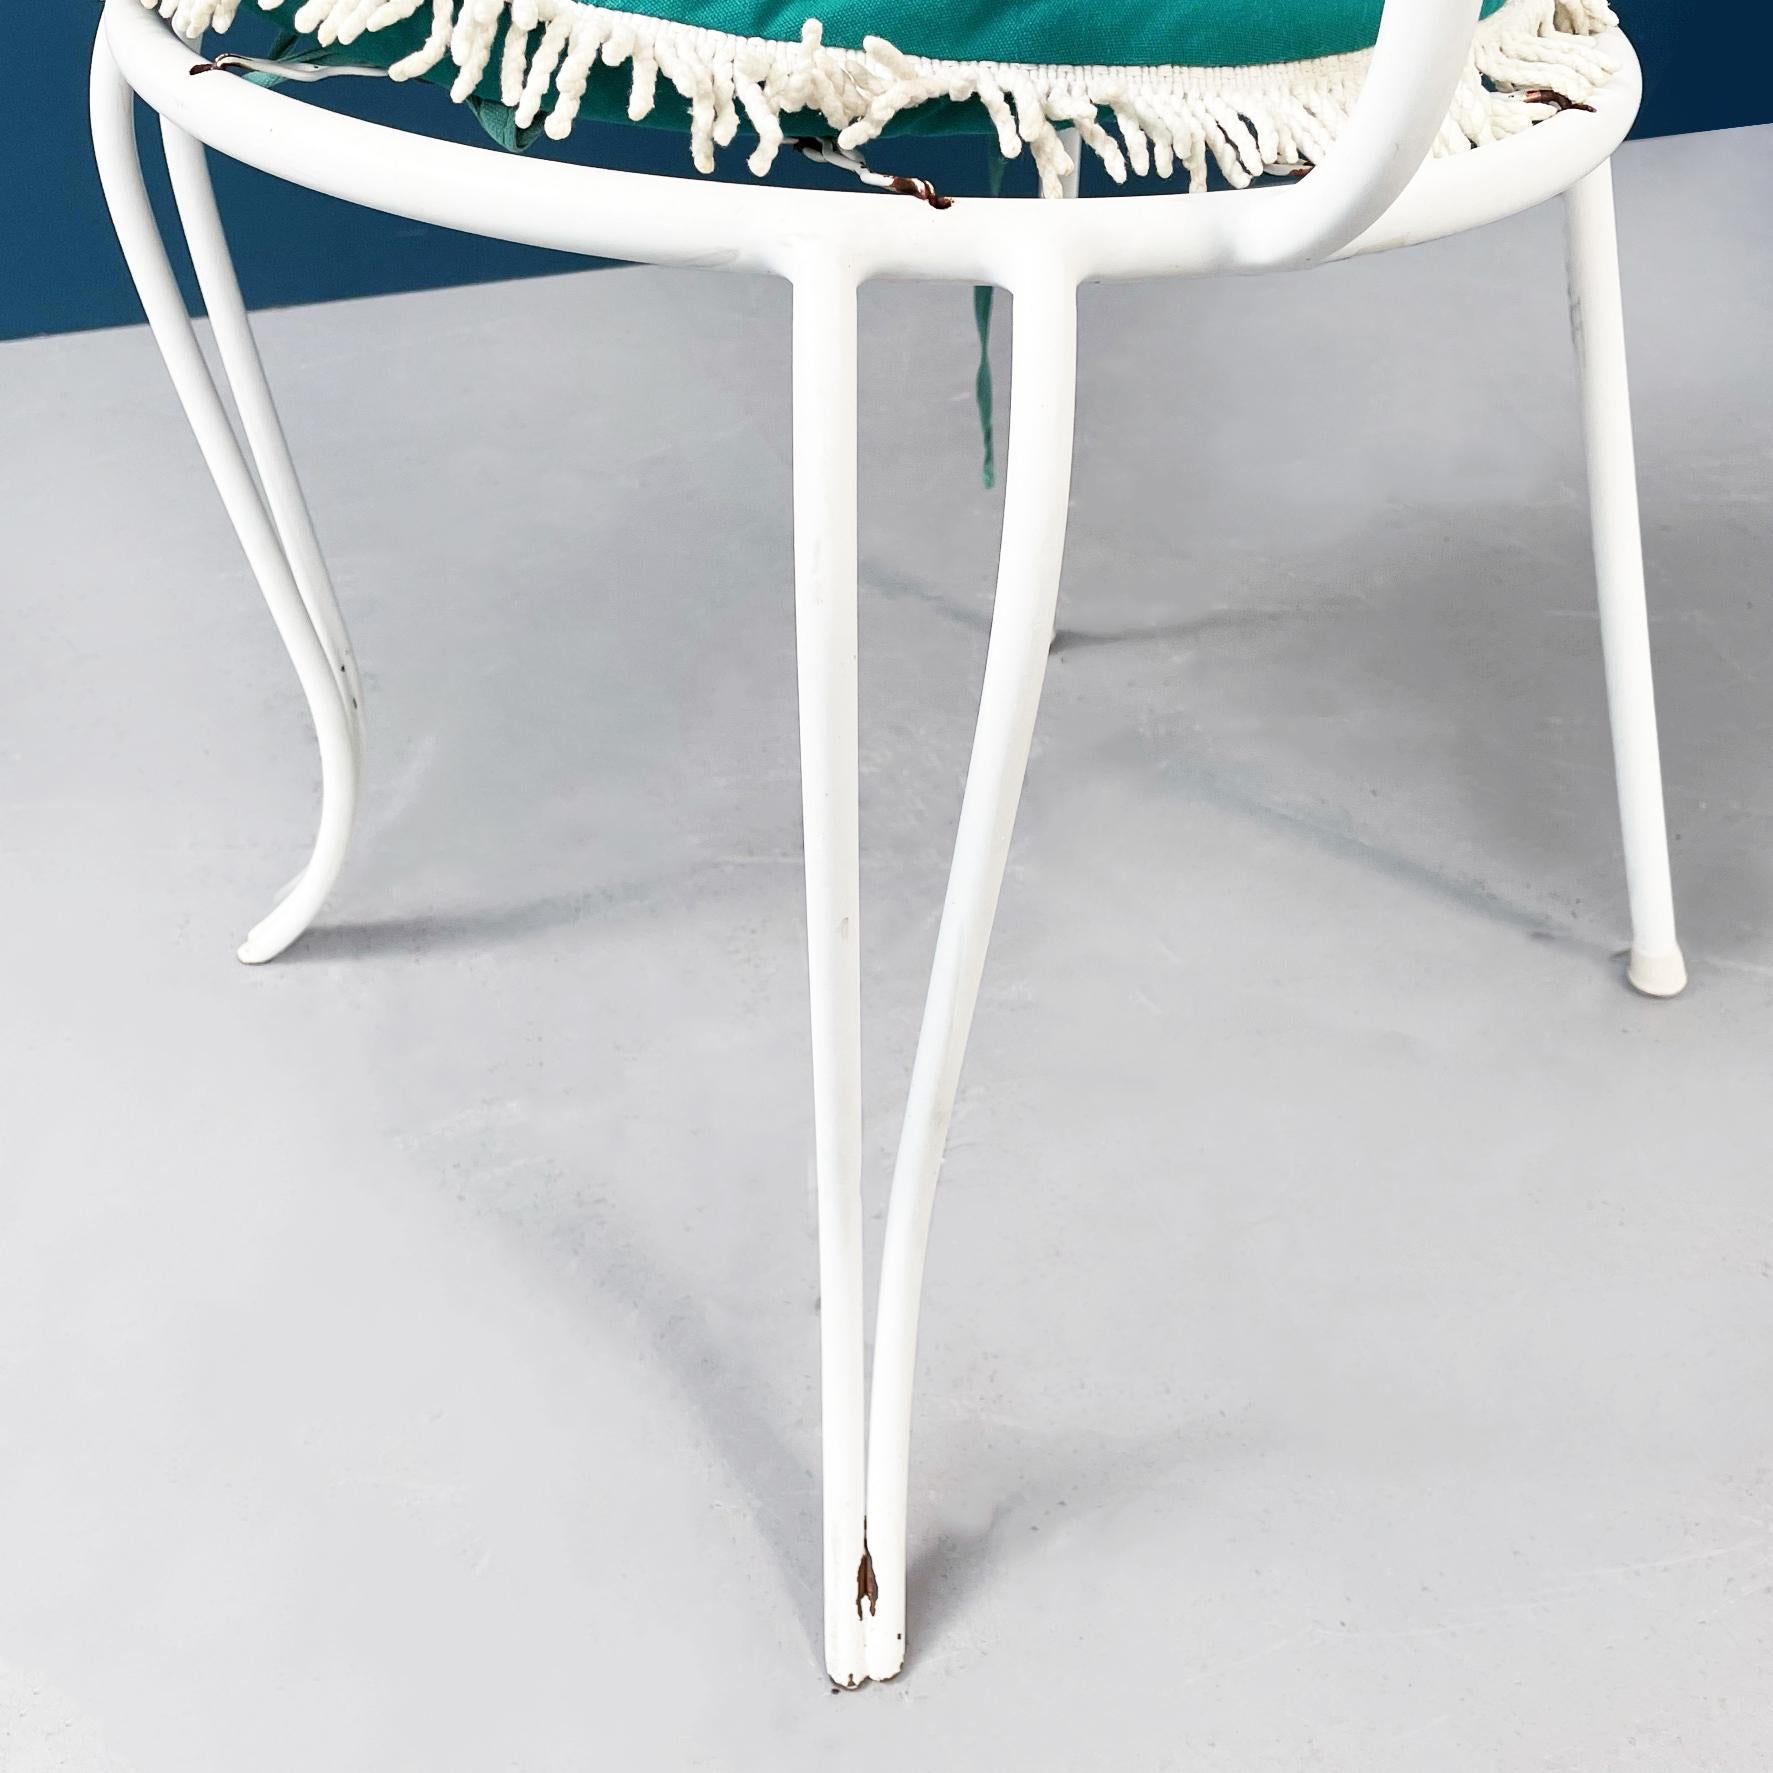 Italian Mid-Century Garden Chairs in White Wrought Iron and Green Fabric, 1960s For Sale 9